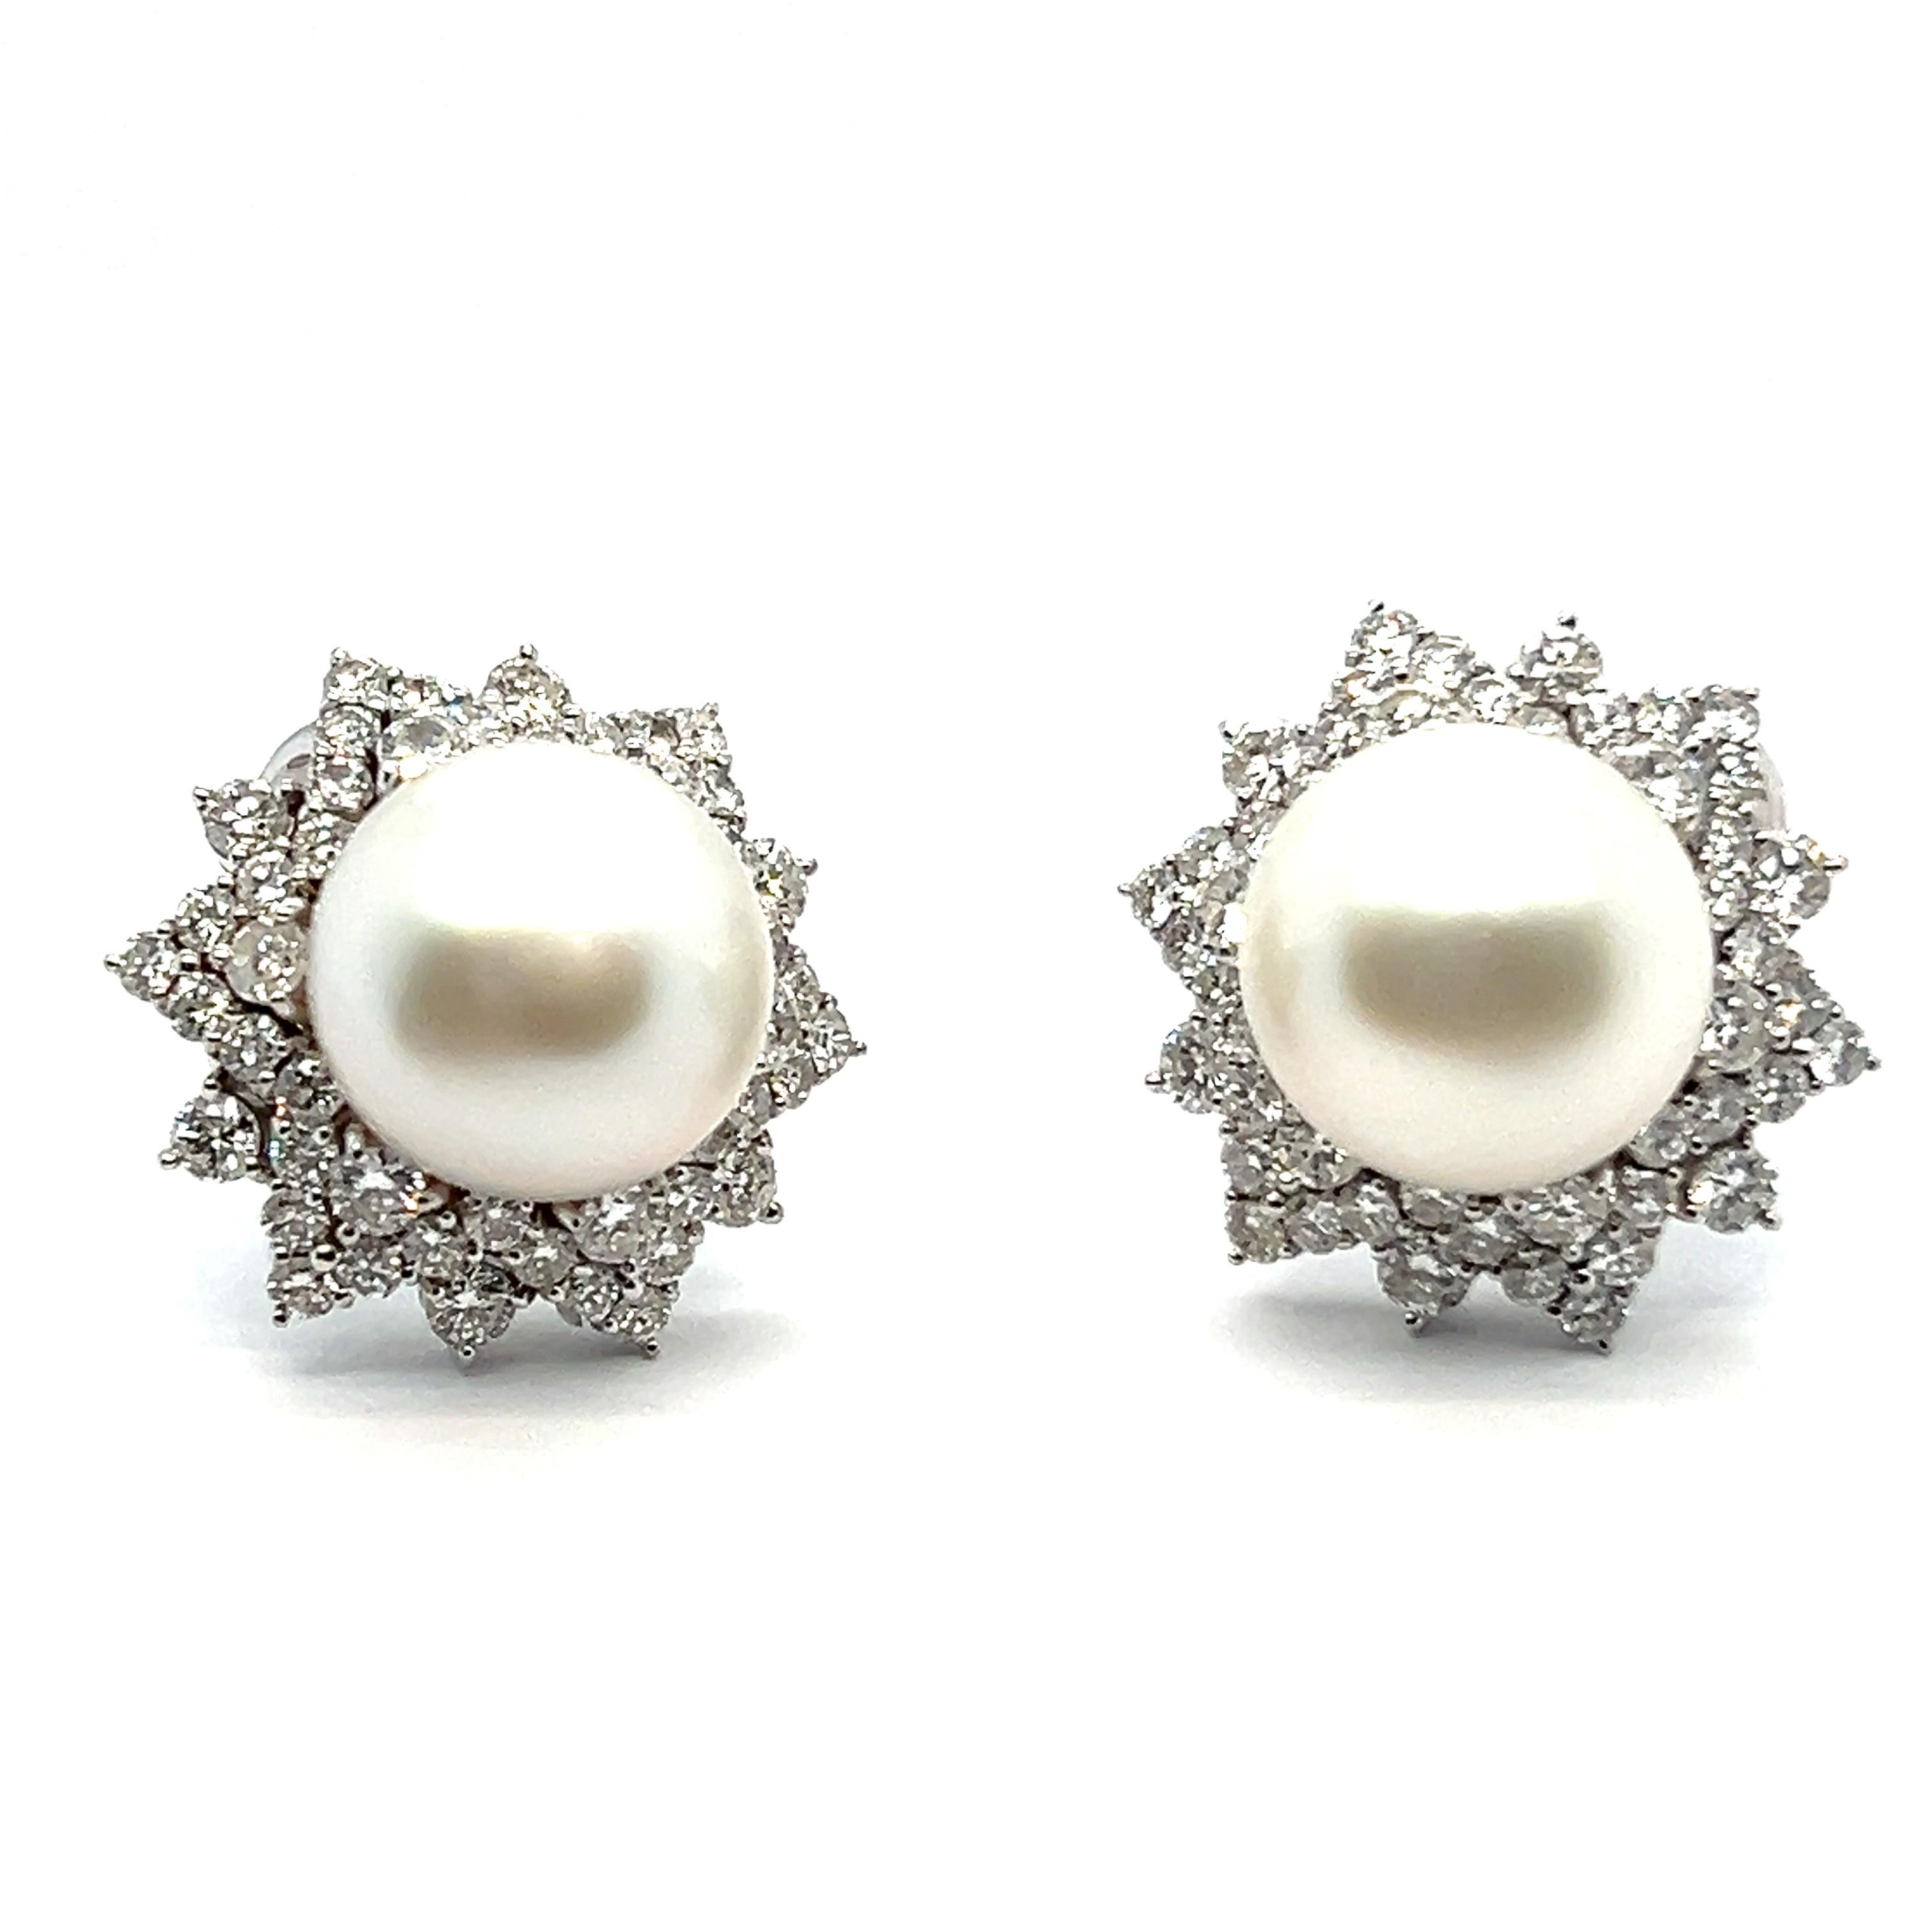 Brilliant Cut South Sea Pearl Earrings in 18 Karat White Gold by Meister For Sale